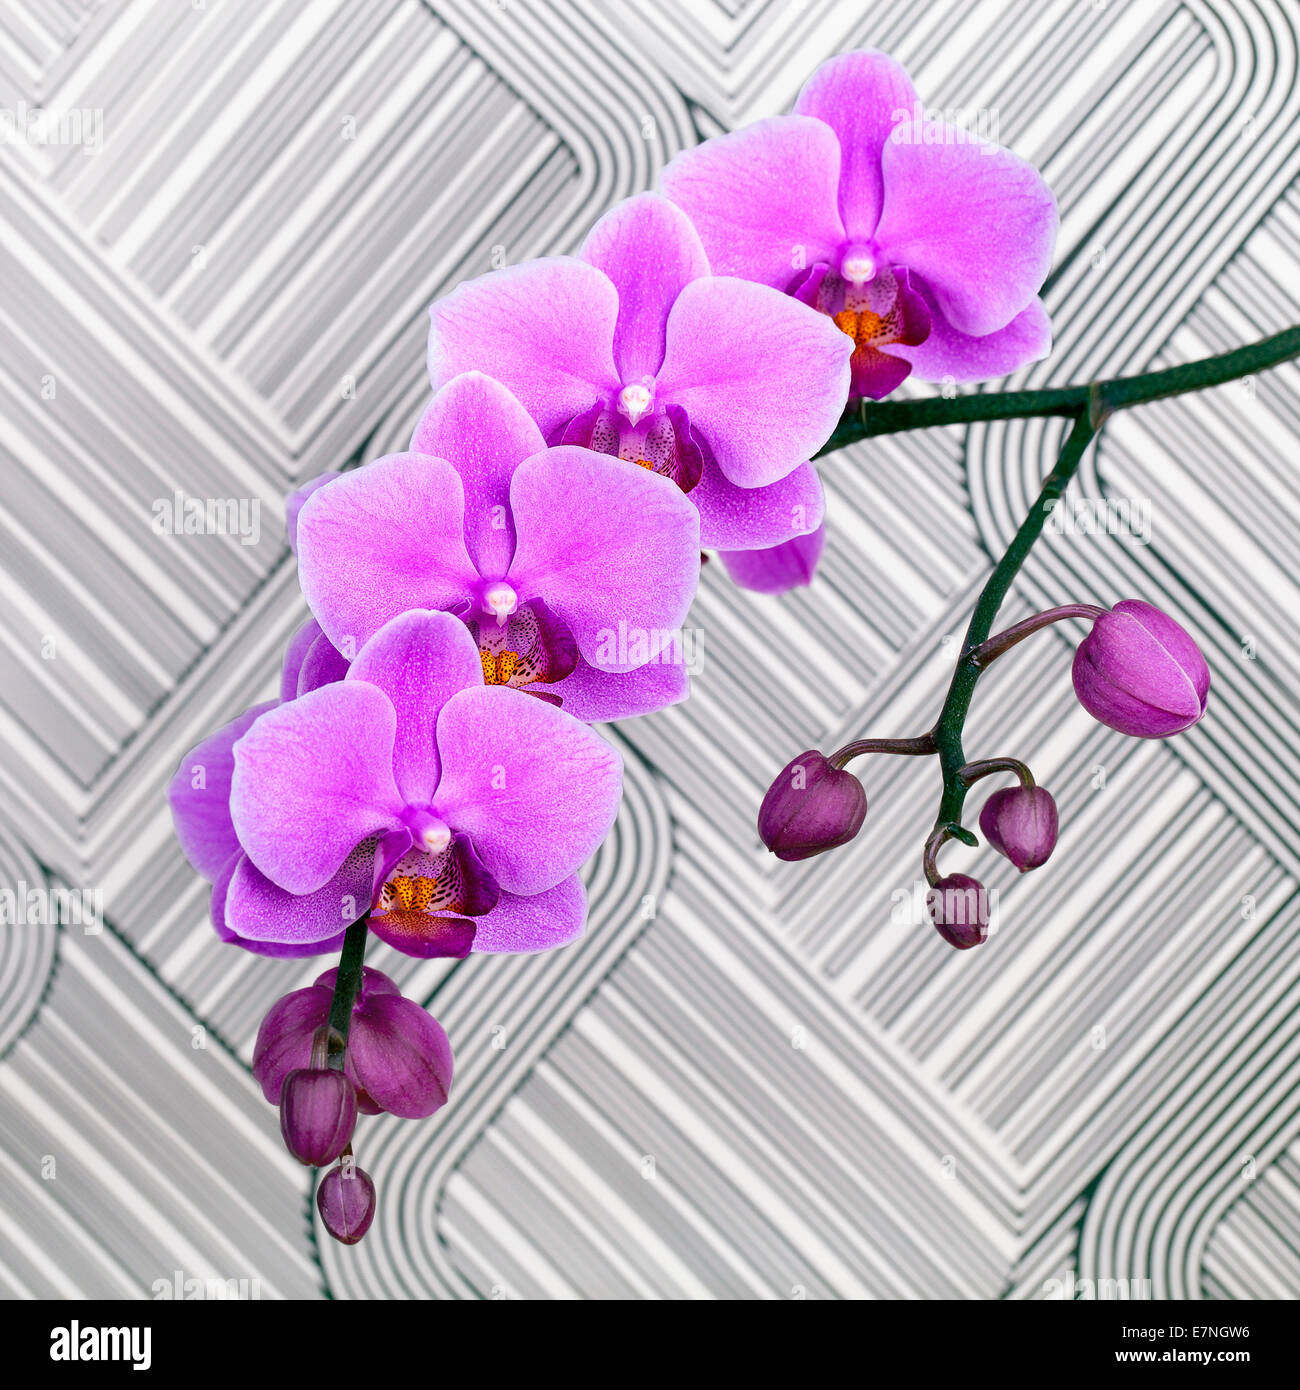 close up shot of pink orchid flower on black and white striped background Stock Photo